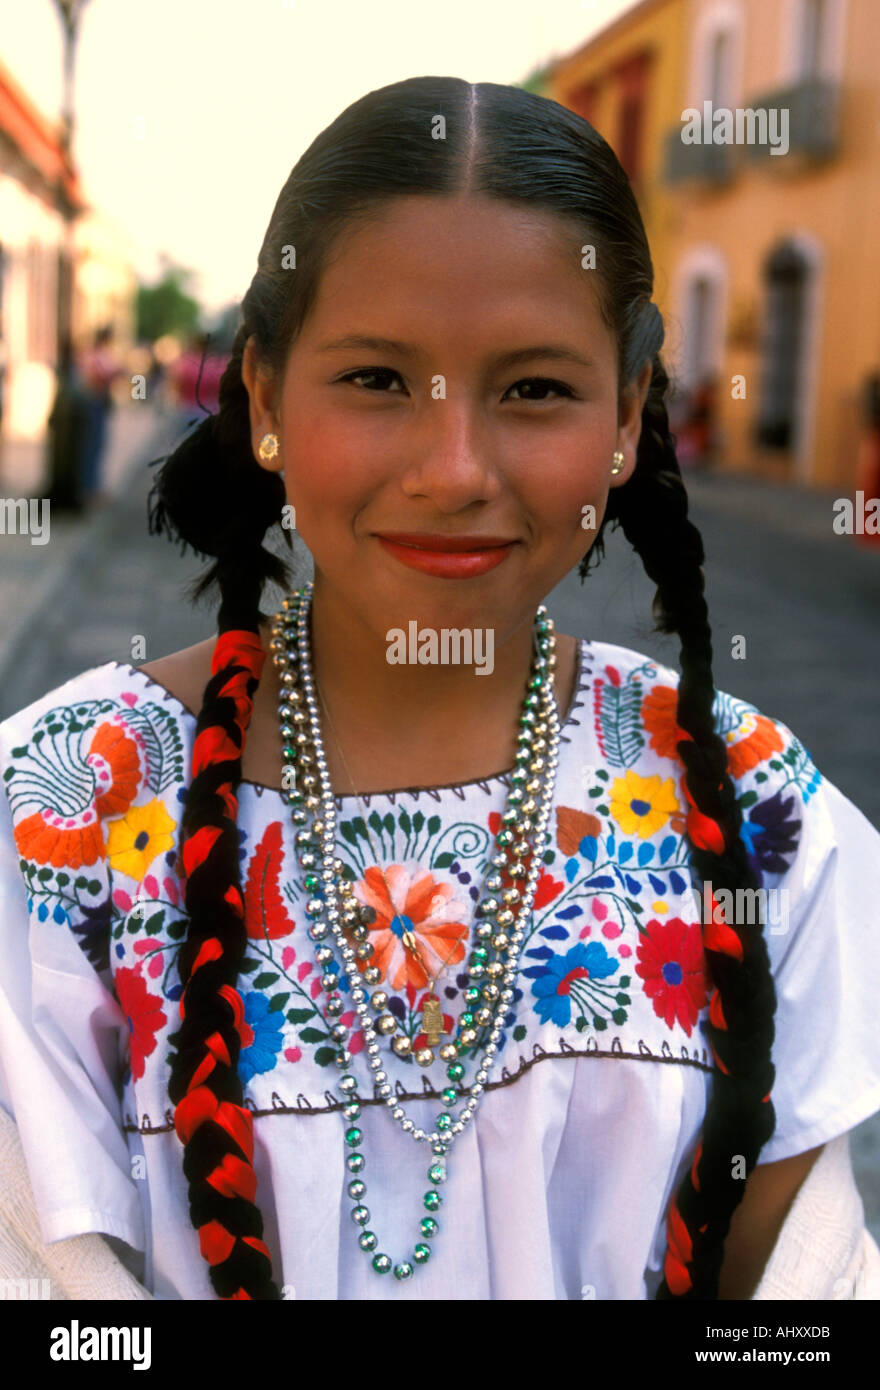 1 One Mexican Woman Young Woman Costumed Dancer Dancer